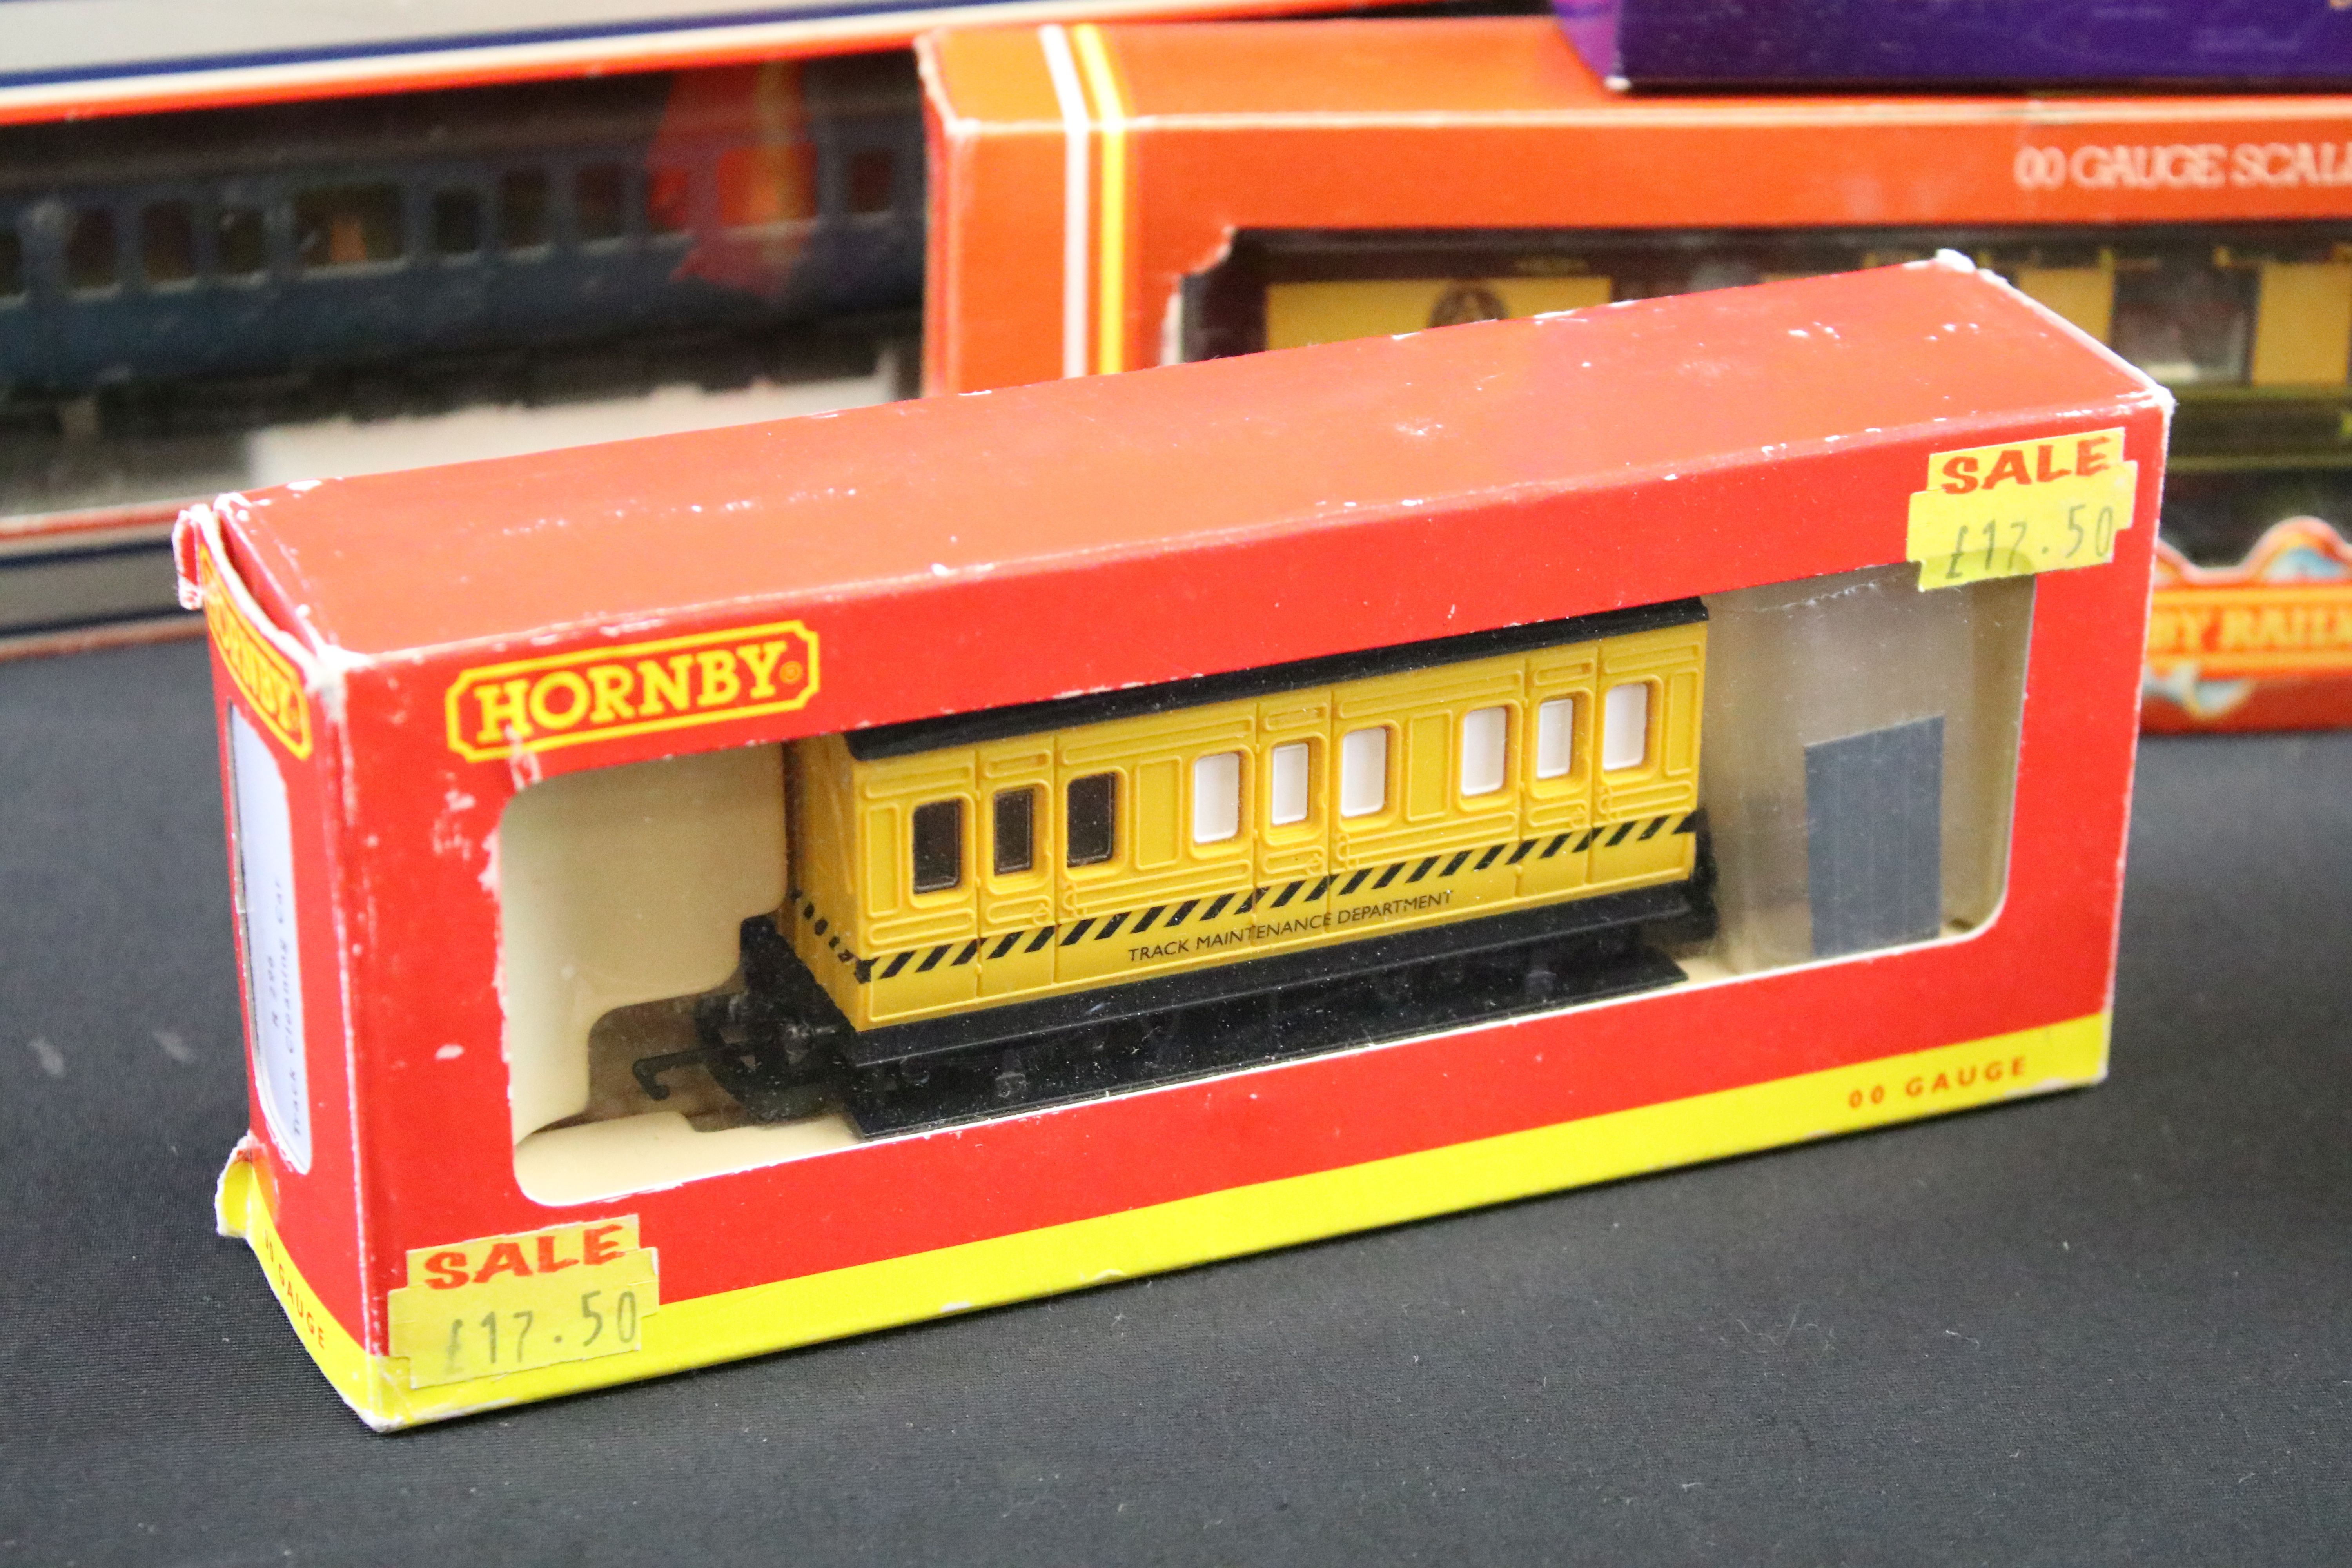 15 Boxed OO gauge items of rolling stock to include 13 x Hornby featuring R4519, R4520, R4521, - Image 3 of 10